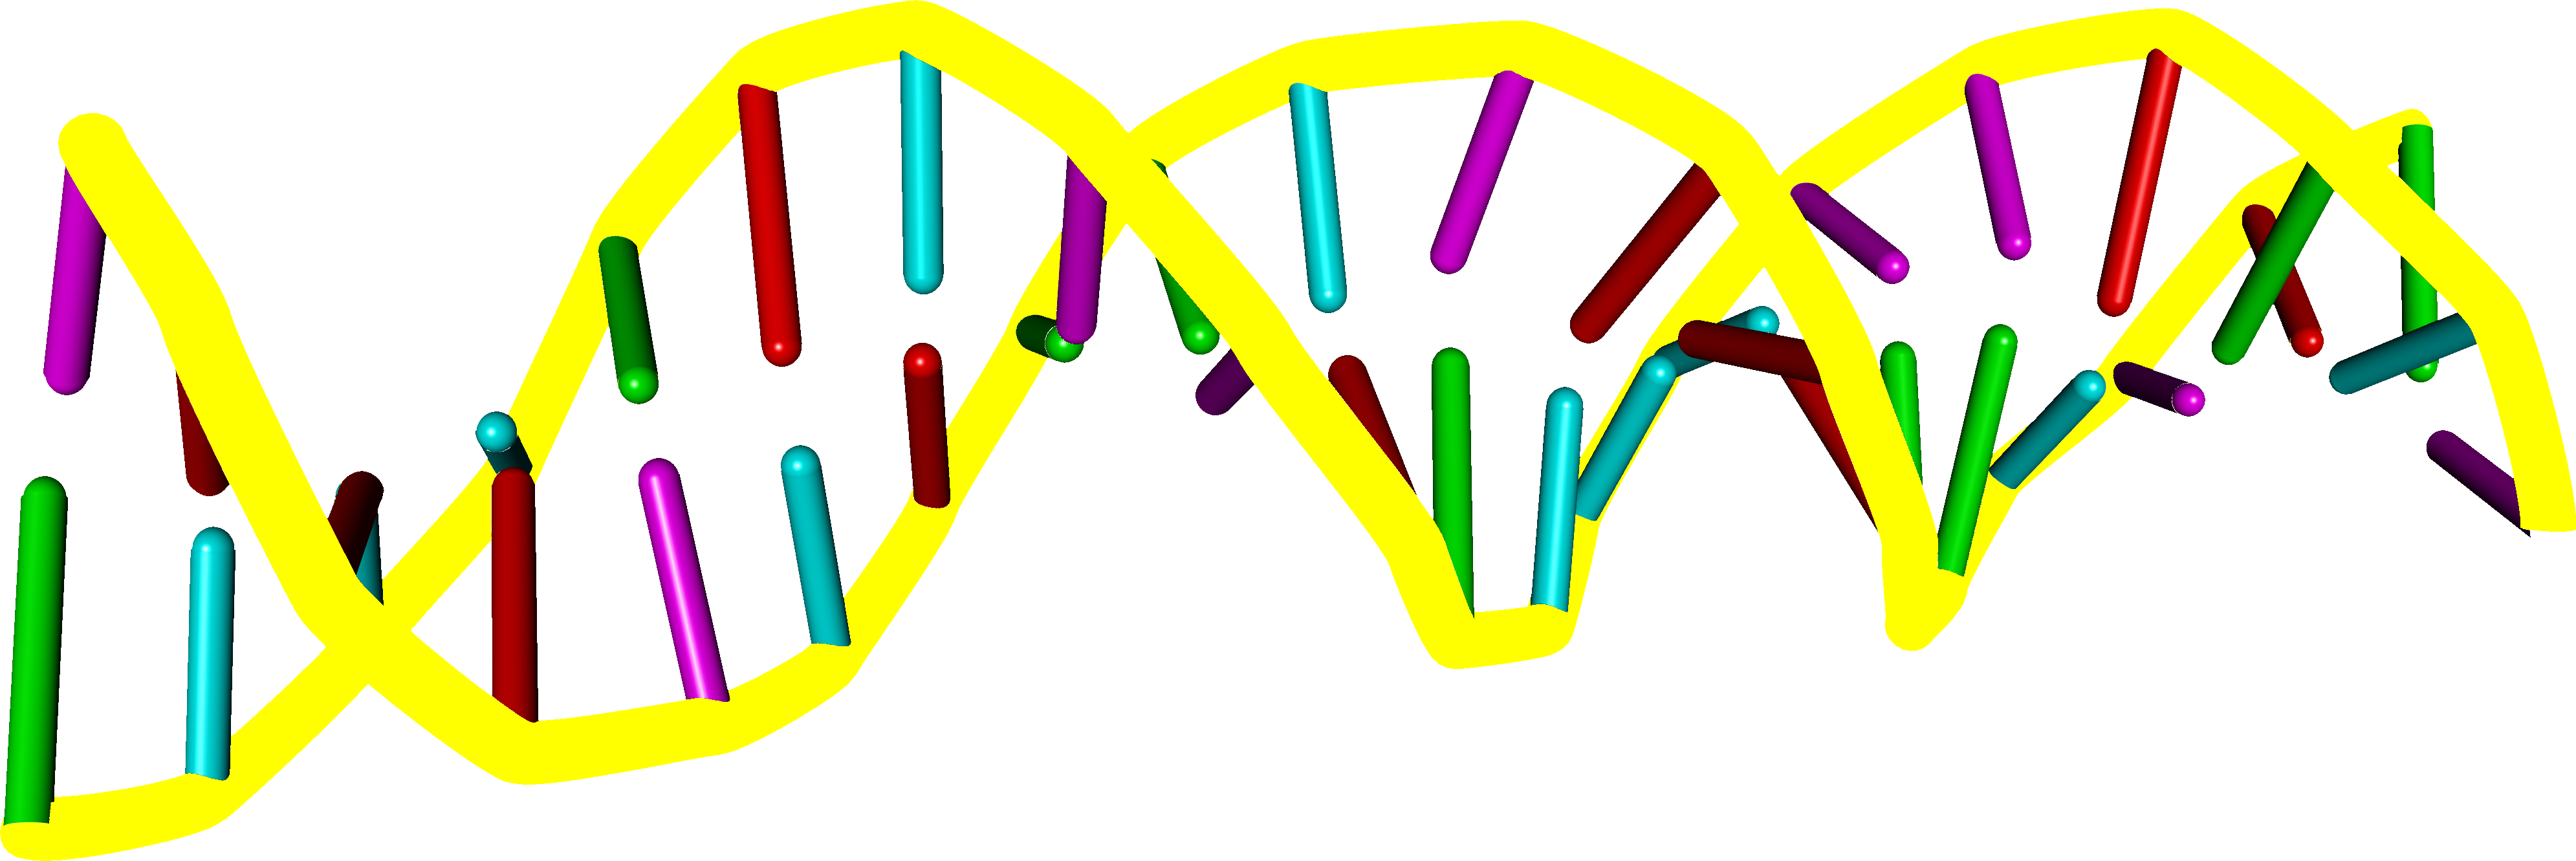 dna clipart double helix